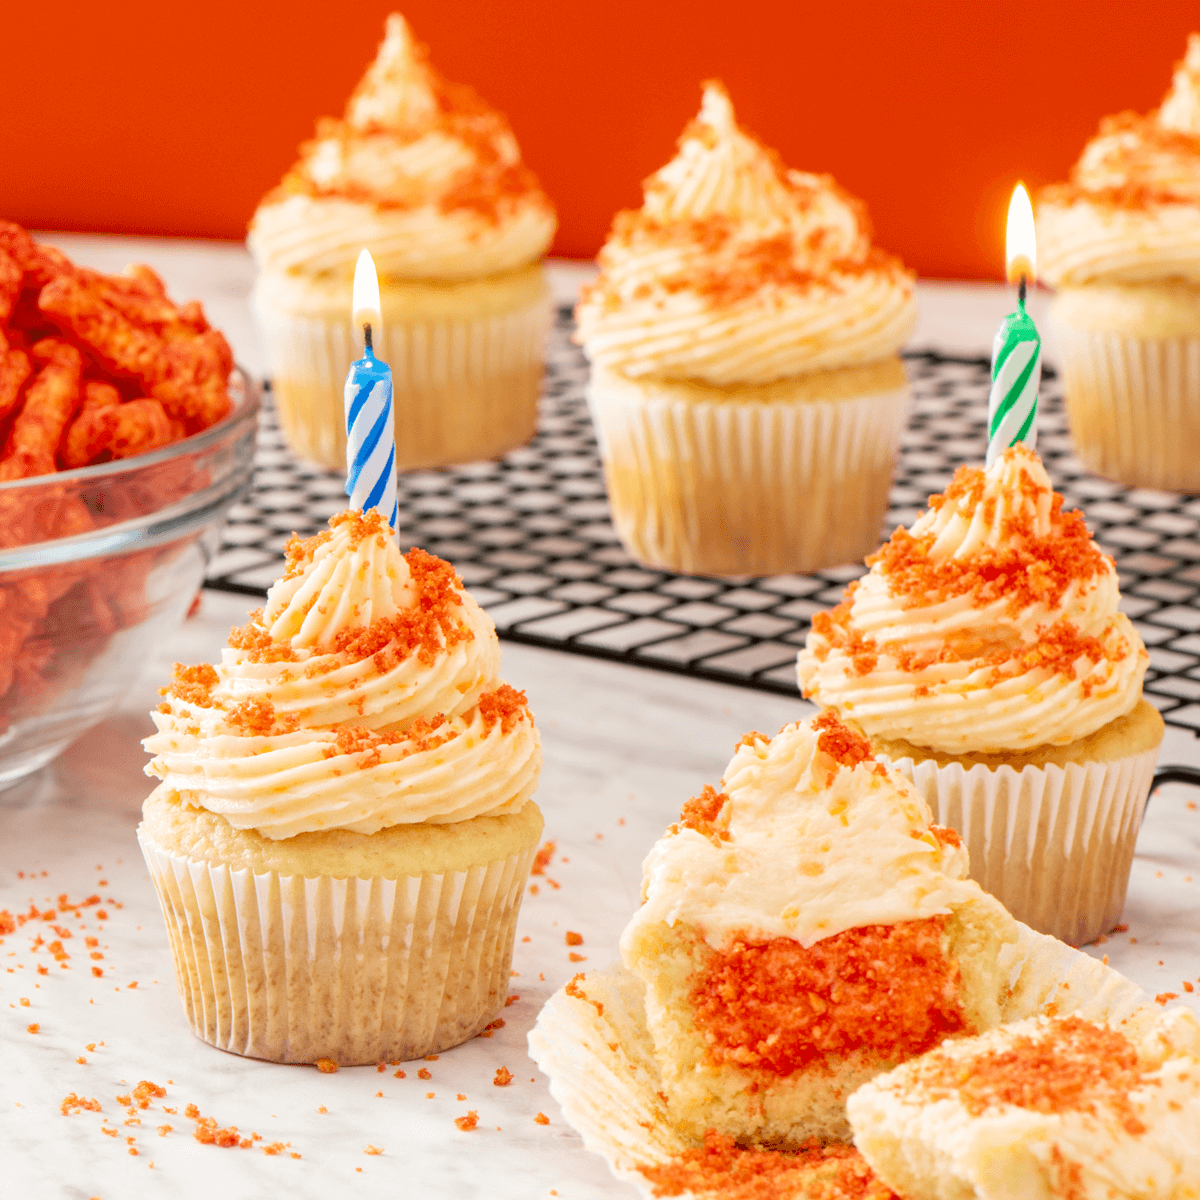 Flamin Hot Cheetos Birthday Party Ideas | Photo 1 of 10 | Catch My Party